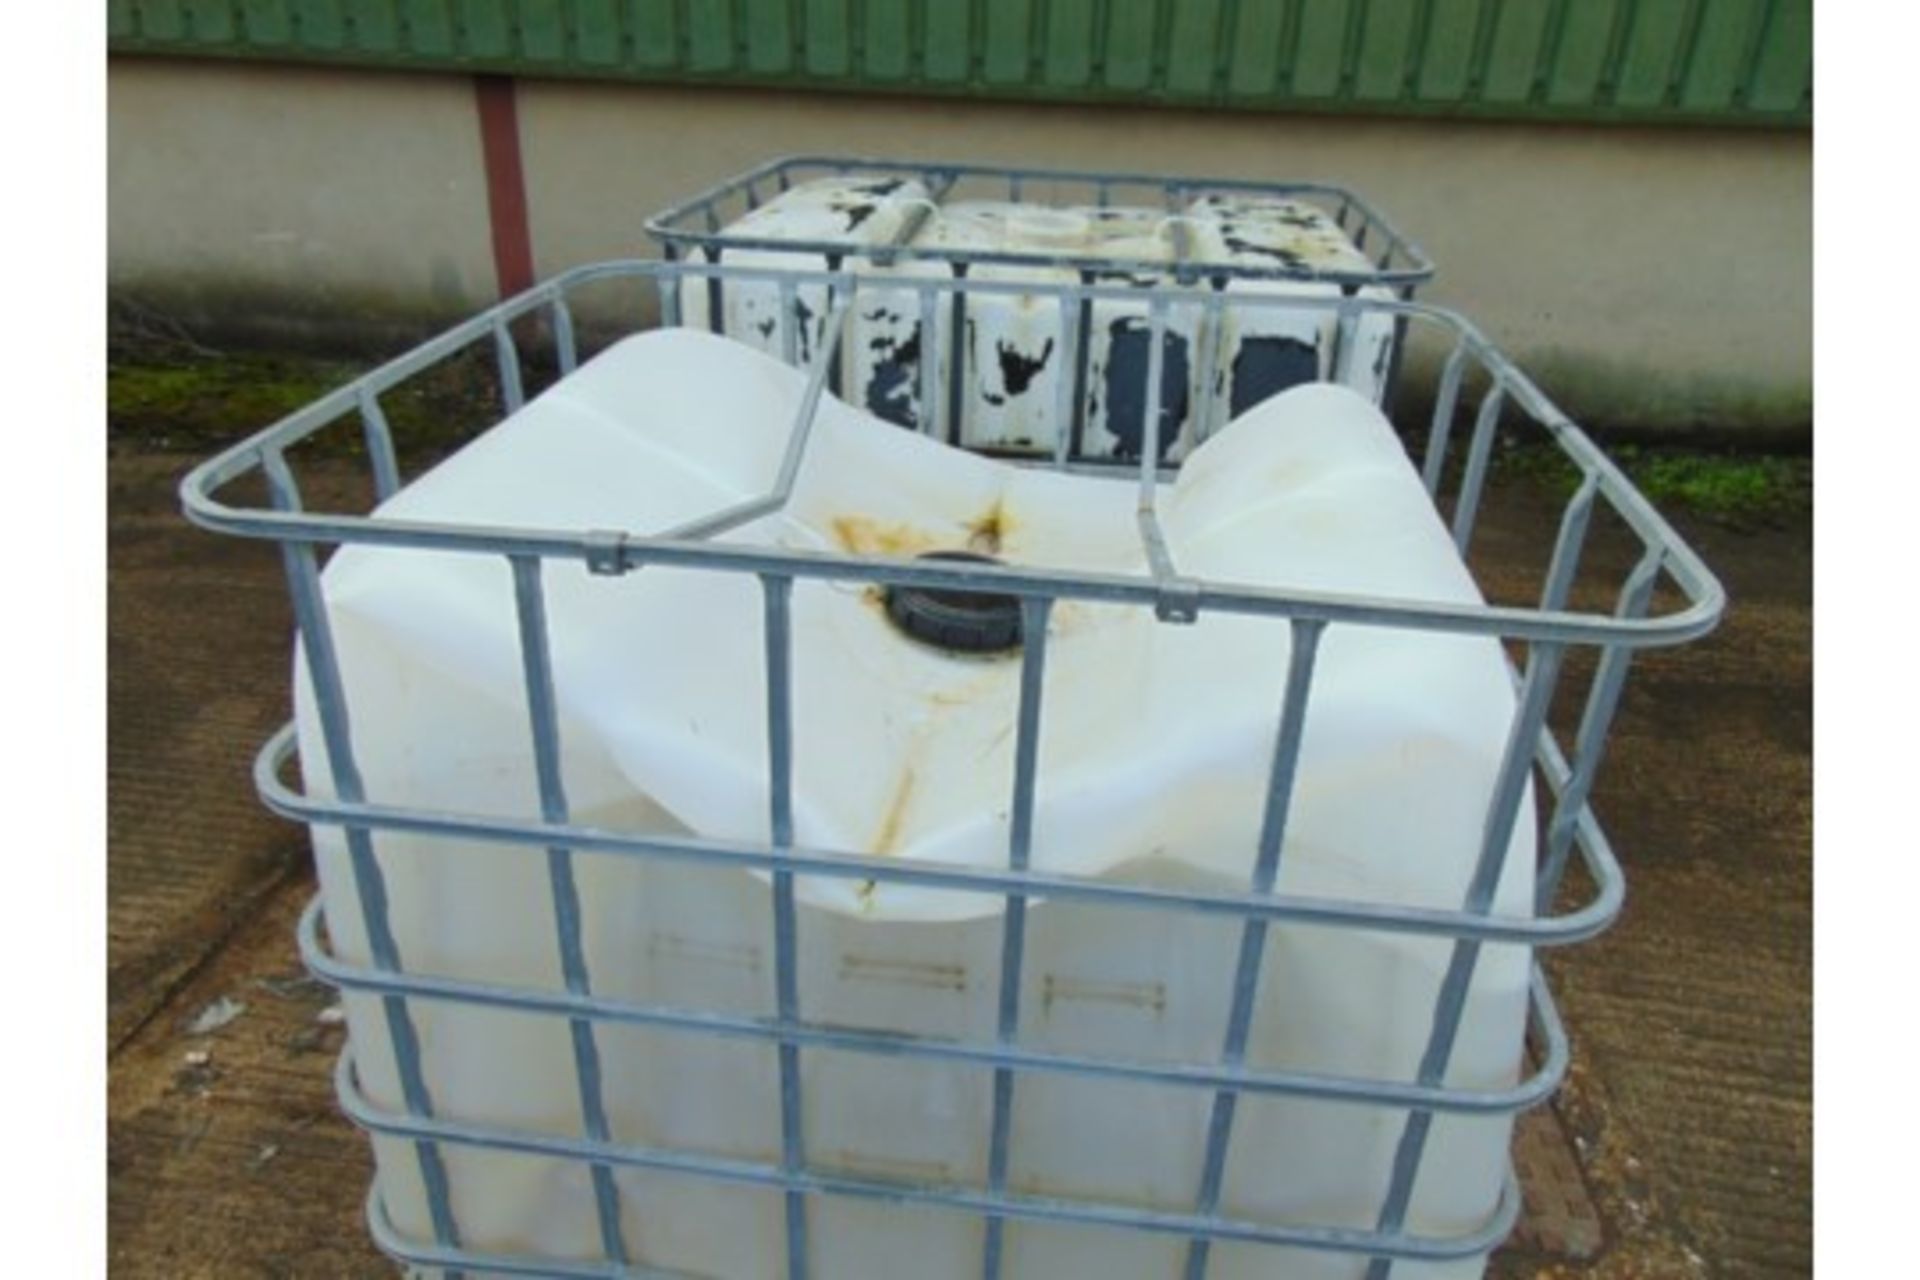 2 x Used 1000 Litre IBC Container / Caged Water Tank - Image 3 of 4